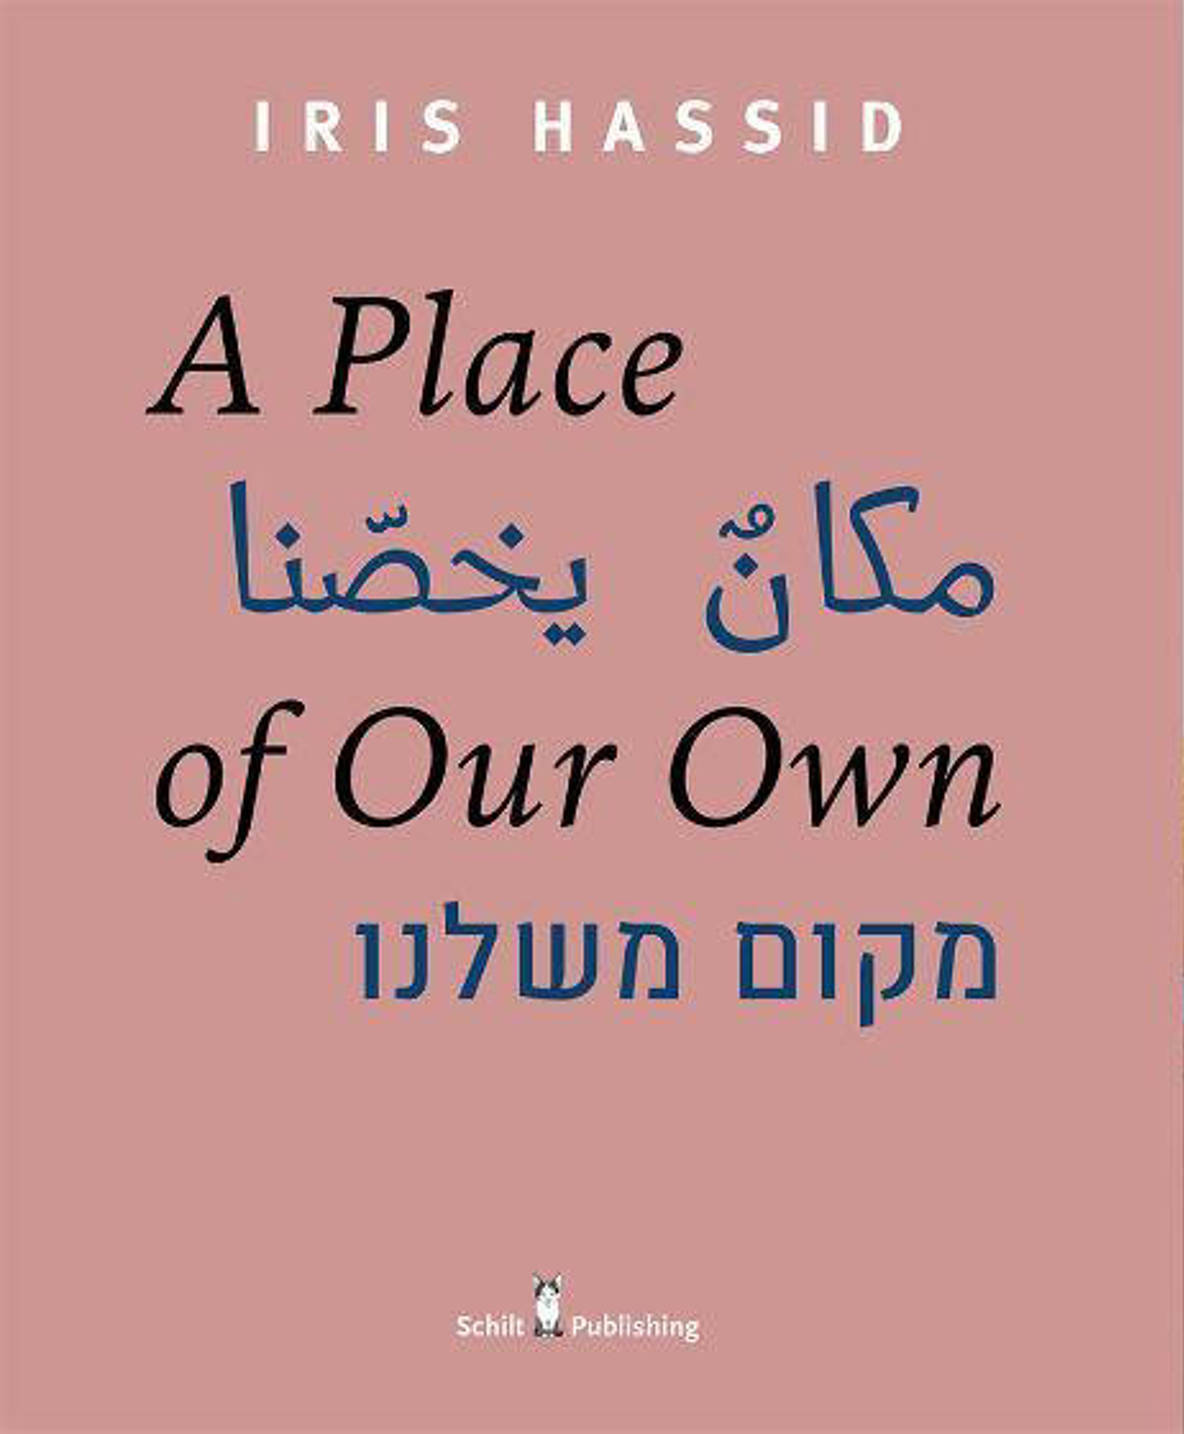 A Place of Our Own Iris Hassid